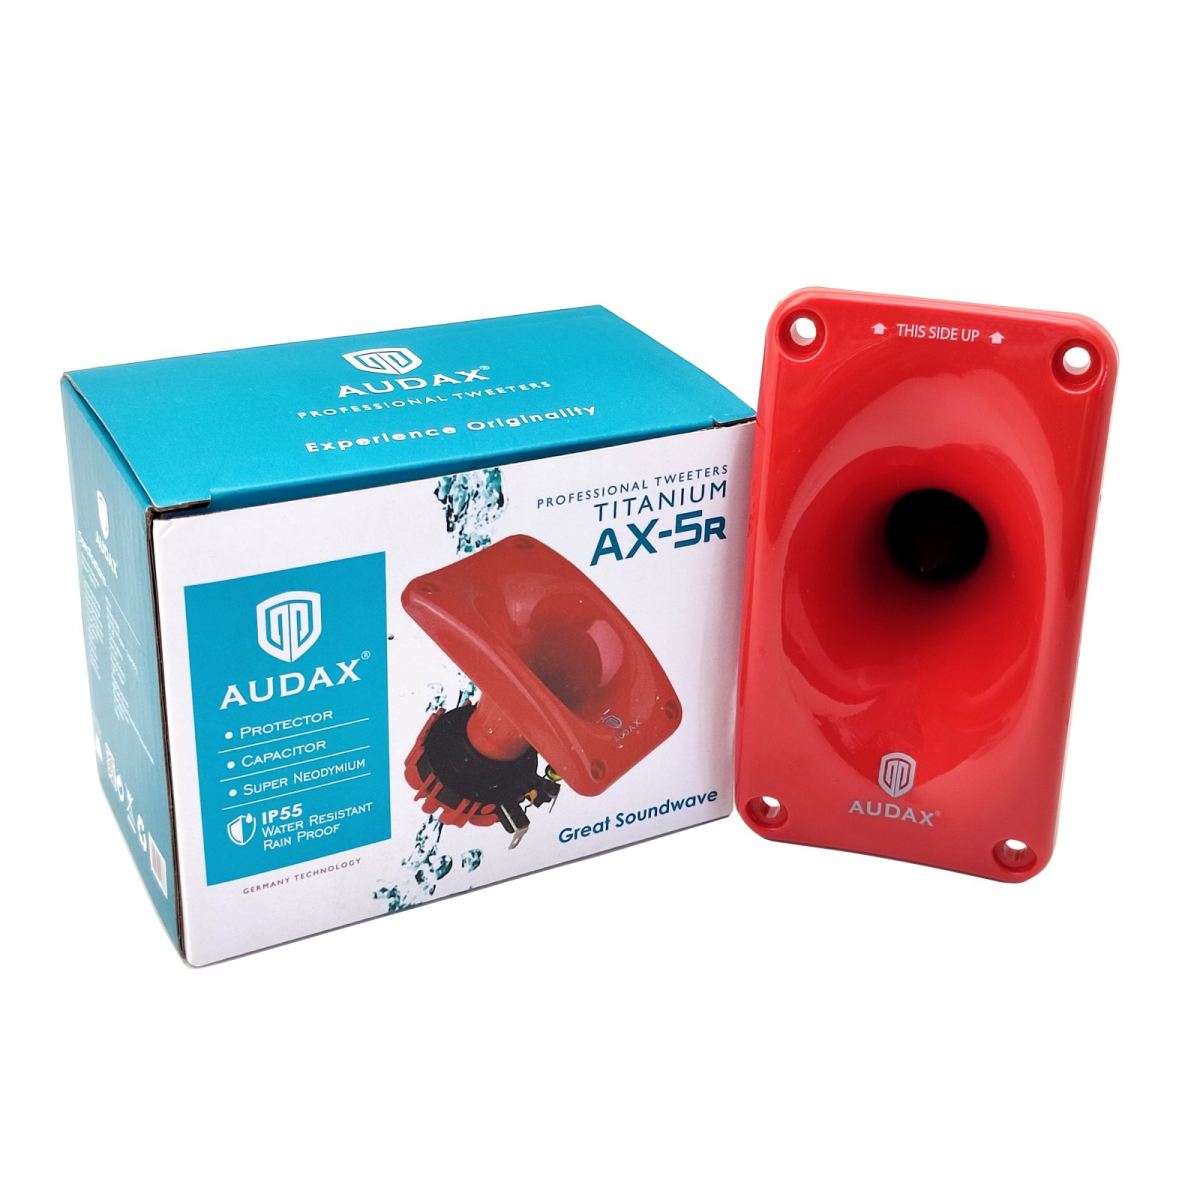 AUDAX AX-5R HORN TWEETER (For Swiftlet Farming Used)